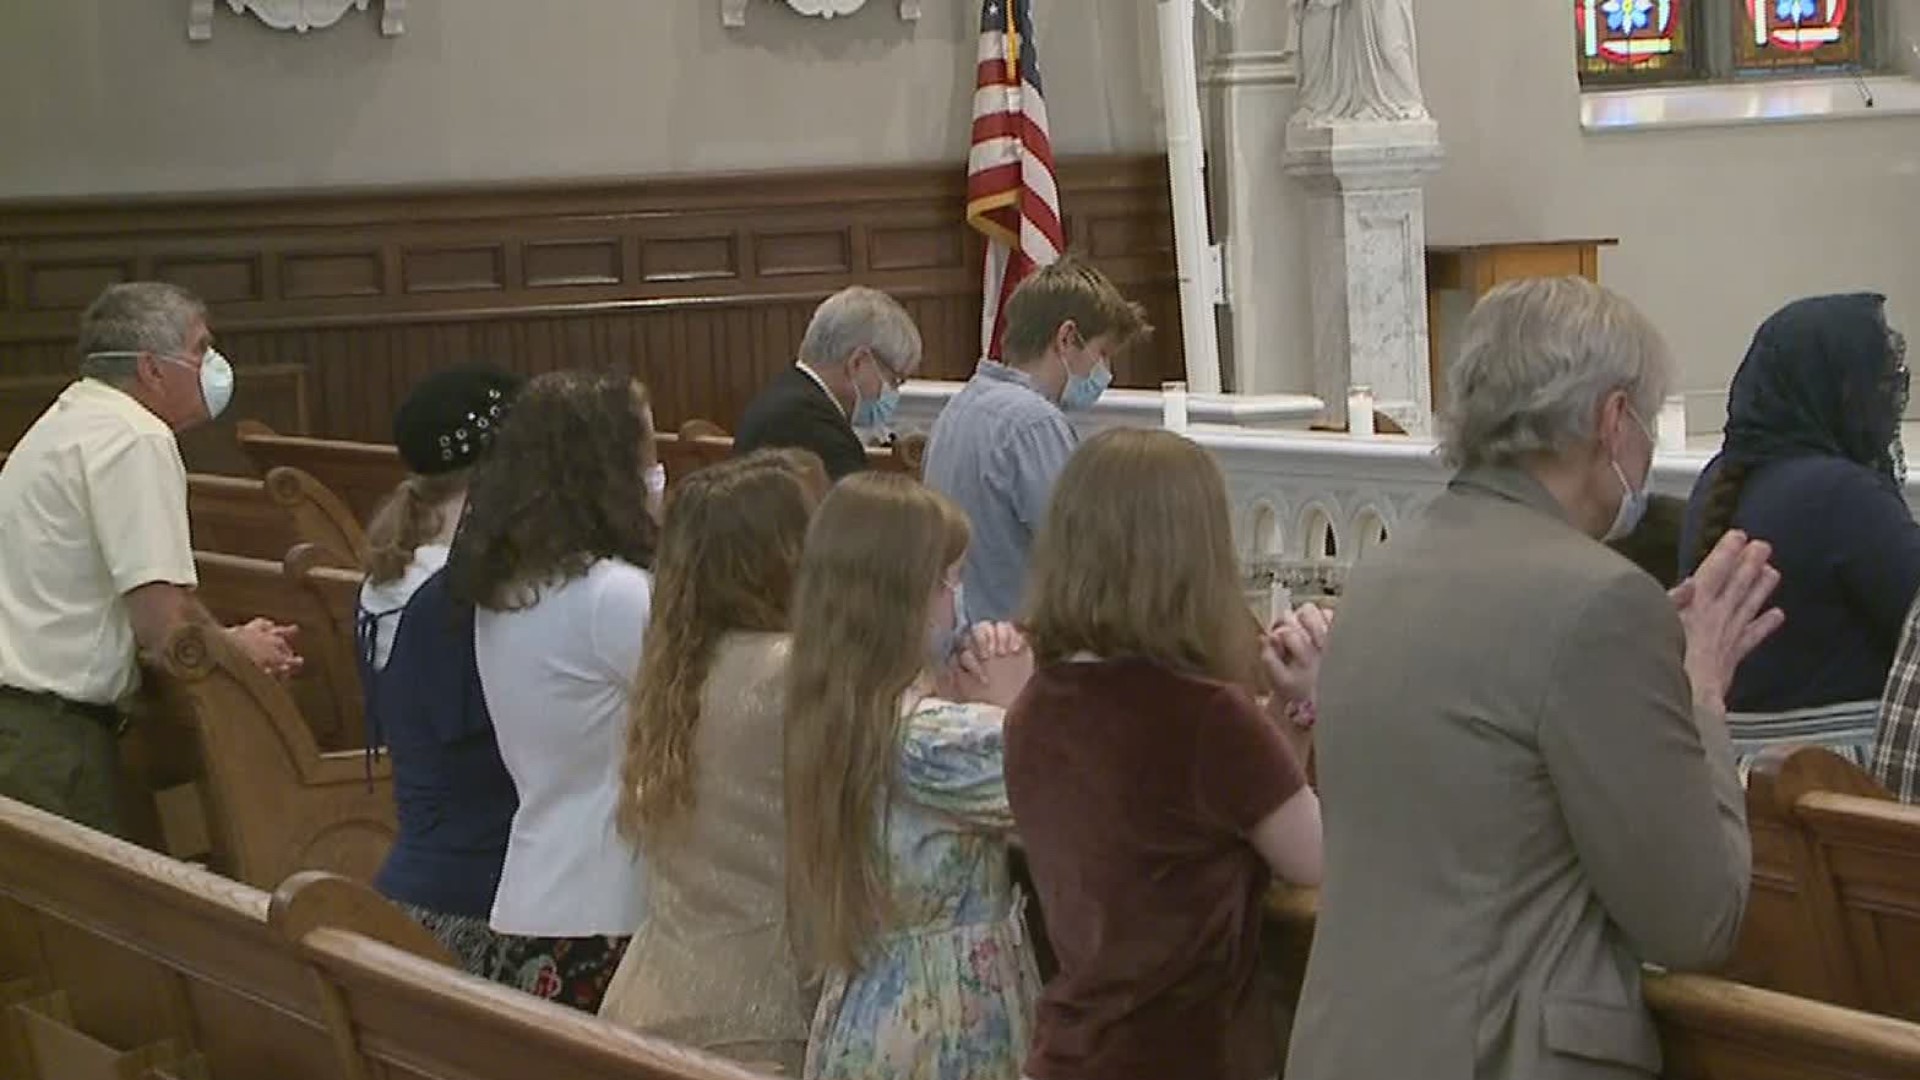 Church officials chose to hold in-person masses this weekend in Williamsport.